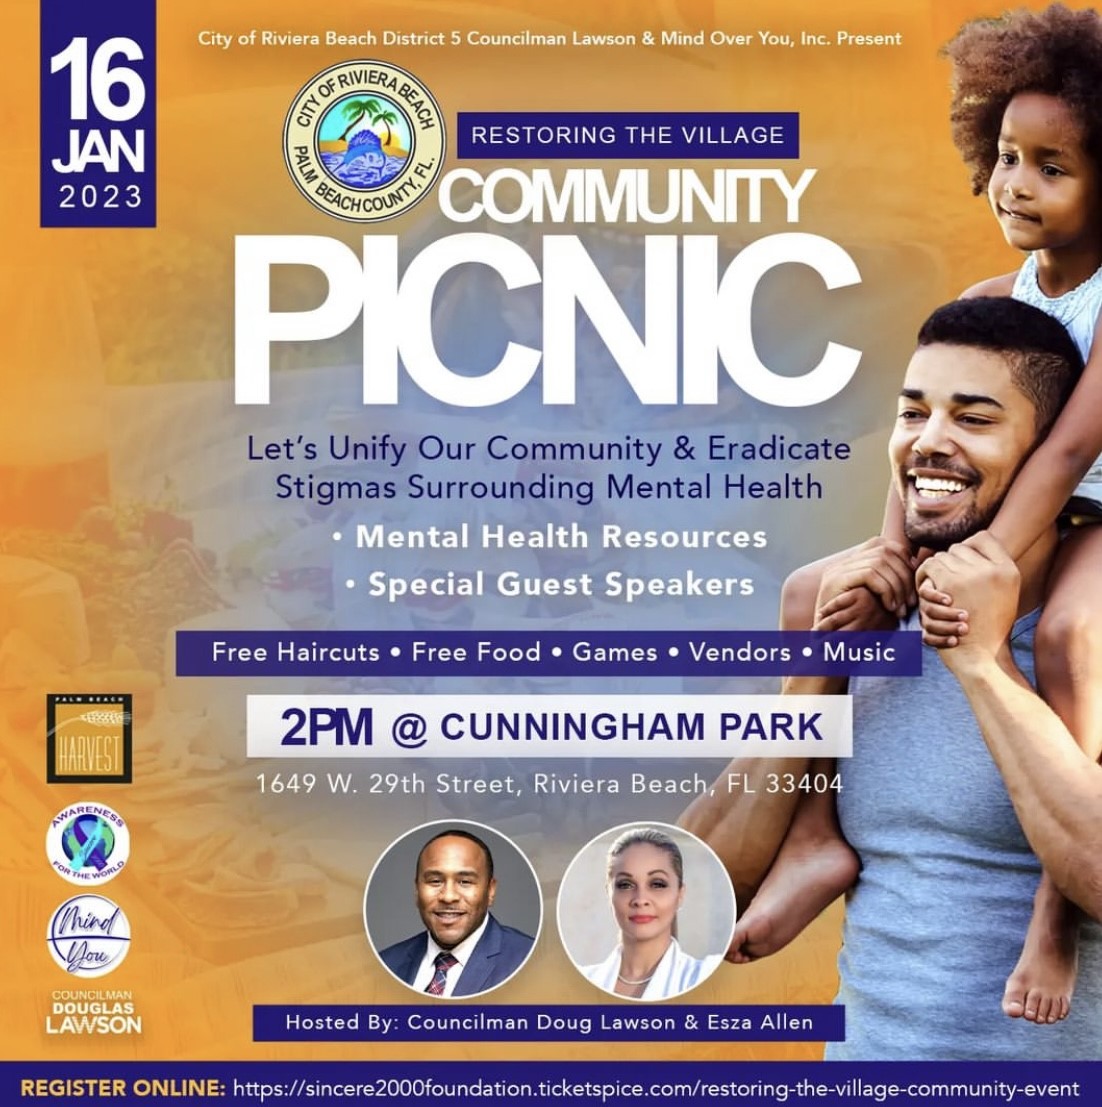 City of Riviera Beach District 5 Councilman Lawson & Mind Over You, Inc. Present GANERAGE RESTORING THE VILLAGE COMMUNITY PICNIC Let's Unify Our Community & Eradicate Stigmas Surrounding Mental Health Mental Health Resources • Special Guest Speakers Free Haircuts • Free Food • Games • Vendors • Music 2PM © CUNNINGHAM PARK 1649 W. 29th Street, Riviera Beach, FL 33404 BOUGLAS LAWSON Hosted By: Councilman Doug Lawson & Esza Allen